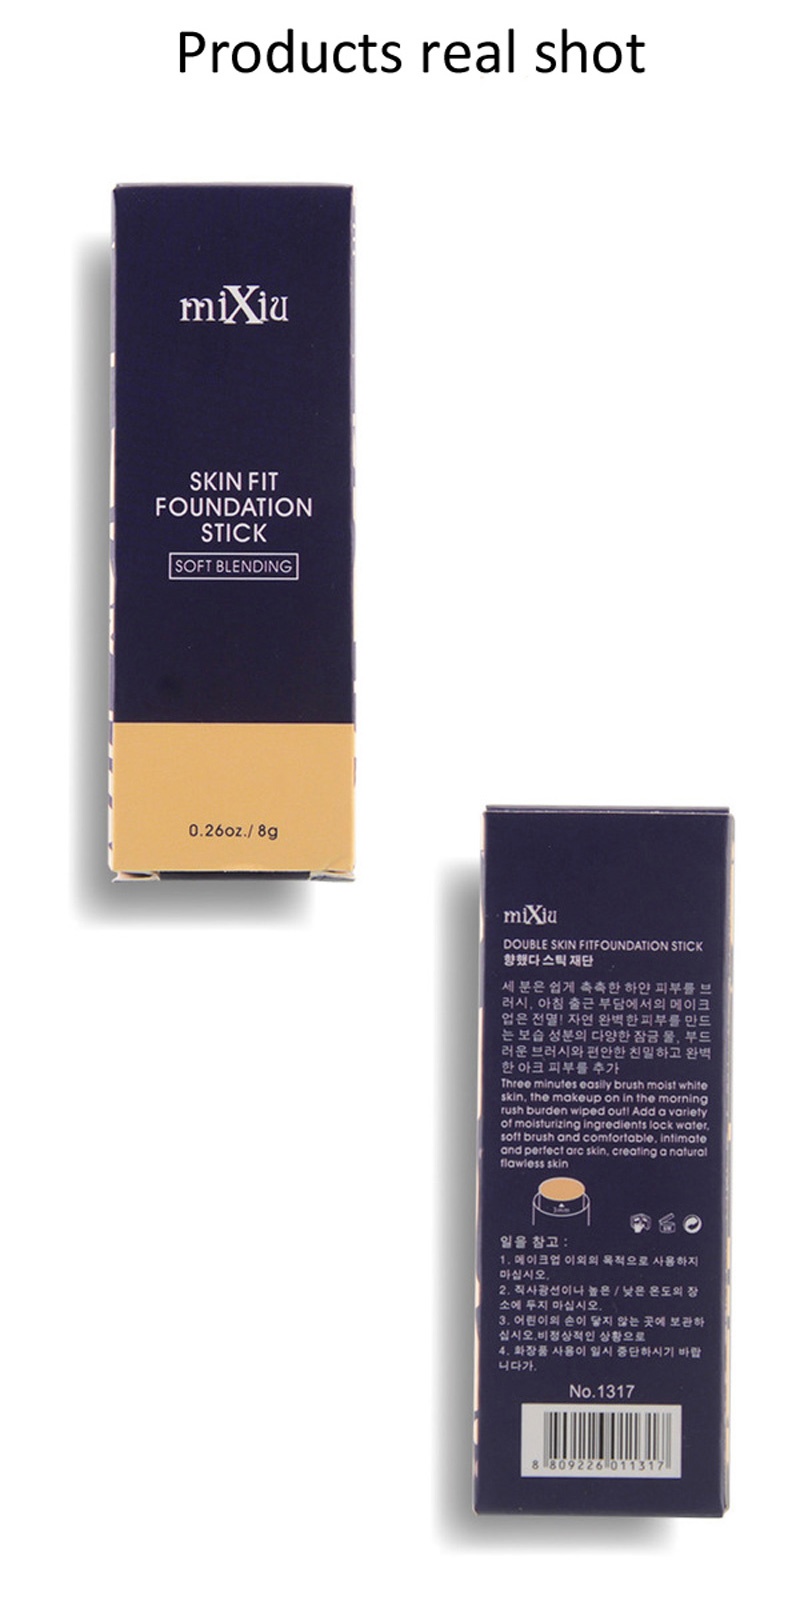 Outer packing of MiXiu foundation stick with brush